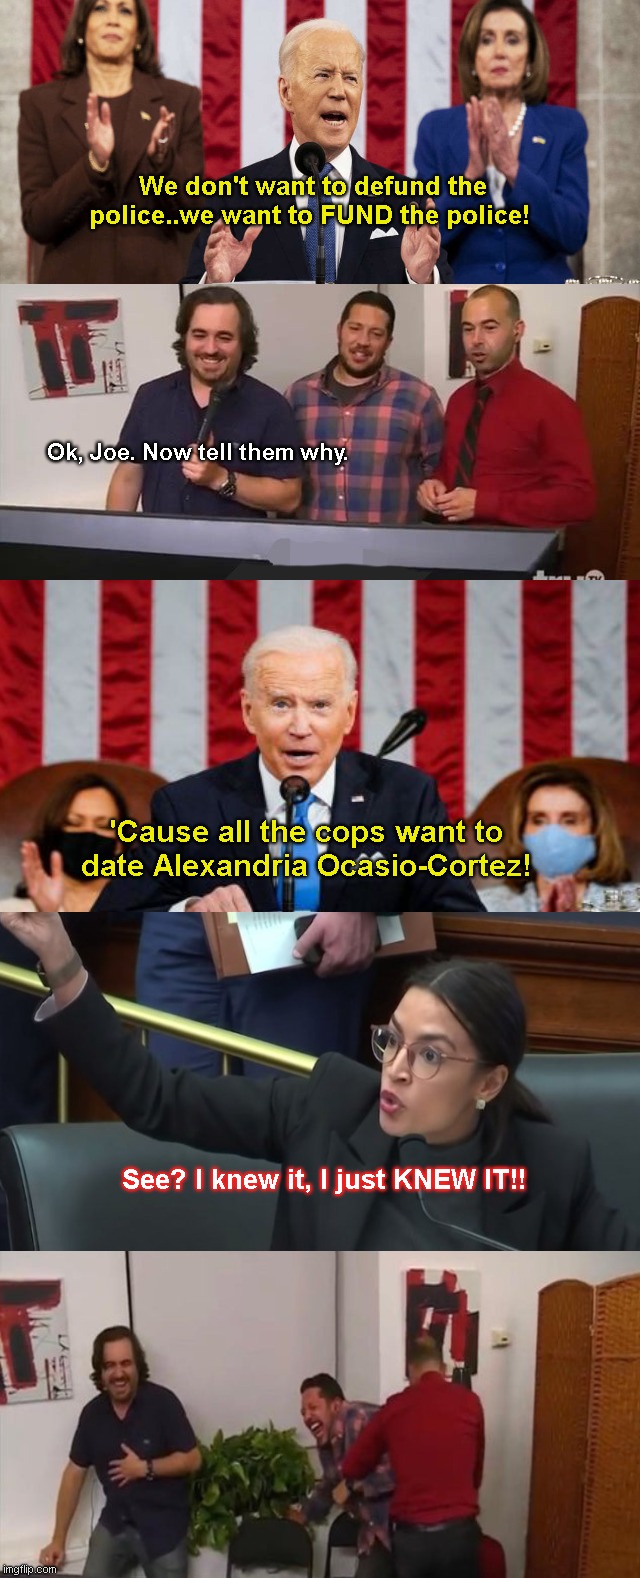 SOTU 2022: Joe changes his mind about defunding the police | We don't want to defund the police..we want to FUND the police! Ok, Joe. Now tell them why. 'Cause all the cops want to date Alexandria Ocasio-Cortez! See? I knew it, I just KNEW IT!! | image tagged in impractical jokers laughing,joe biden,state of the union,fail,crazy aoc,political humor | made w/ Imgflip meme maker